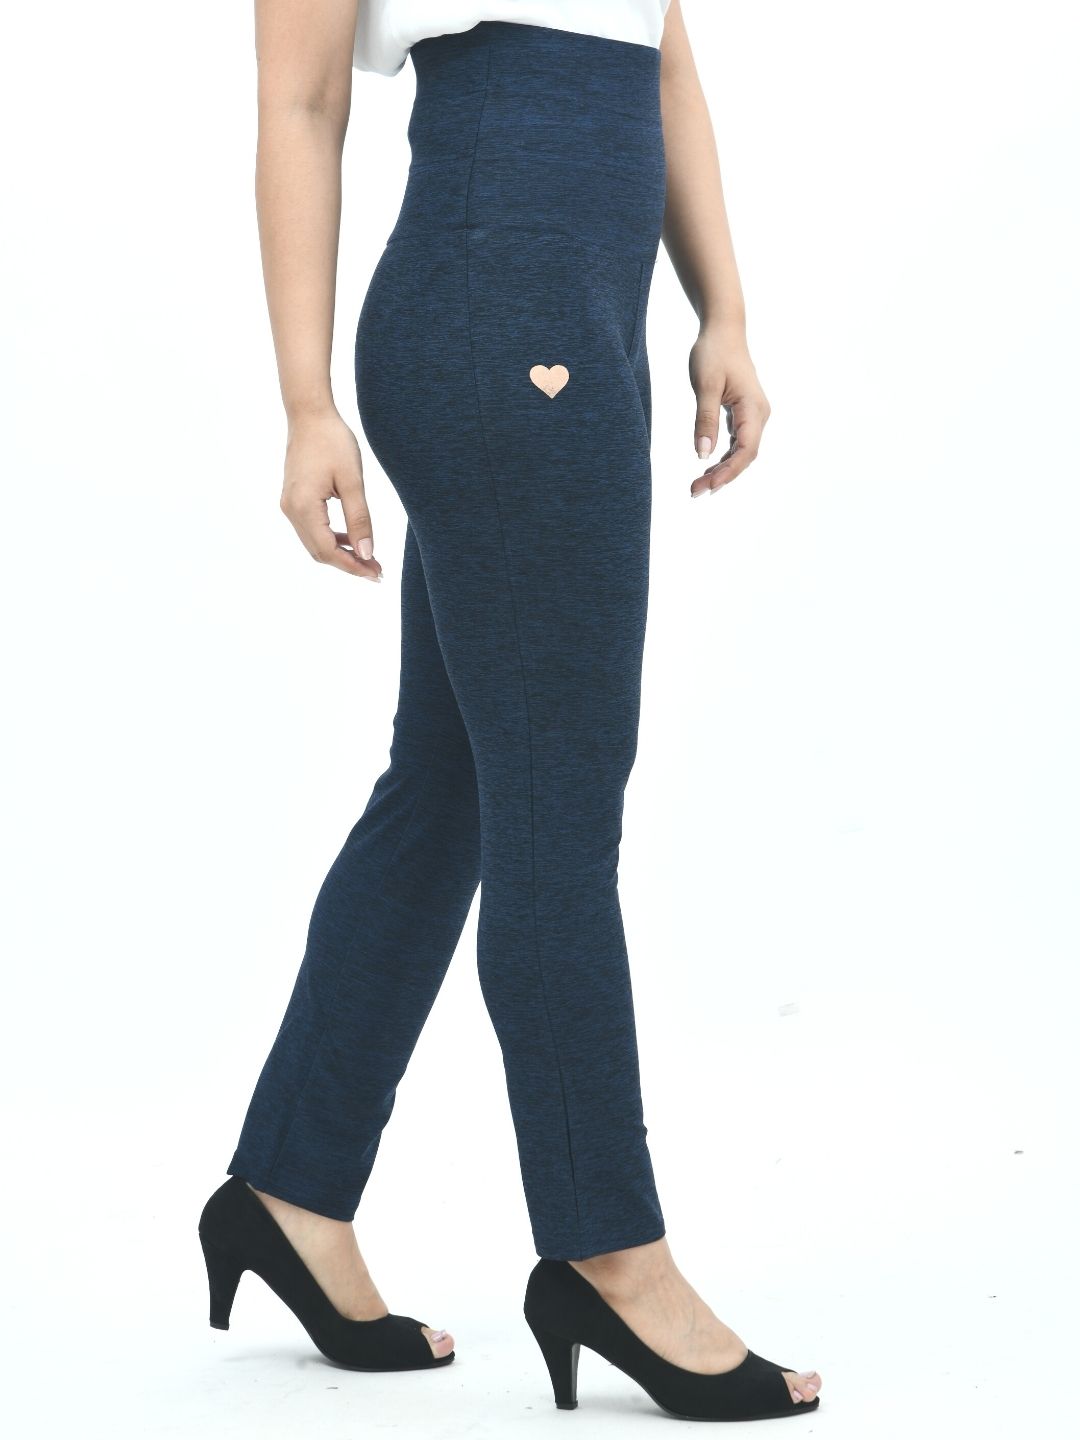 ON SALE !! Post Partum Tummy Control Pants. Navy Melange (with